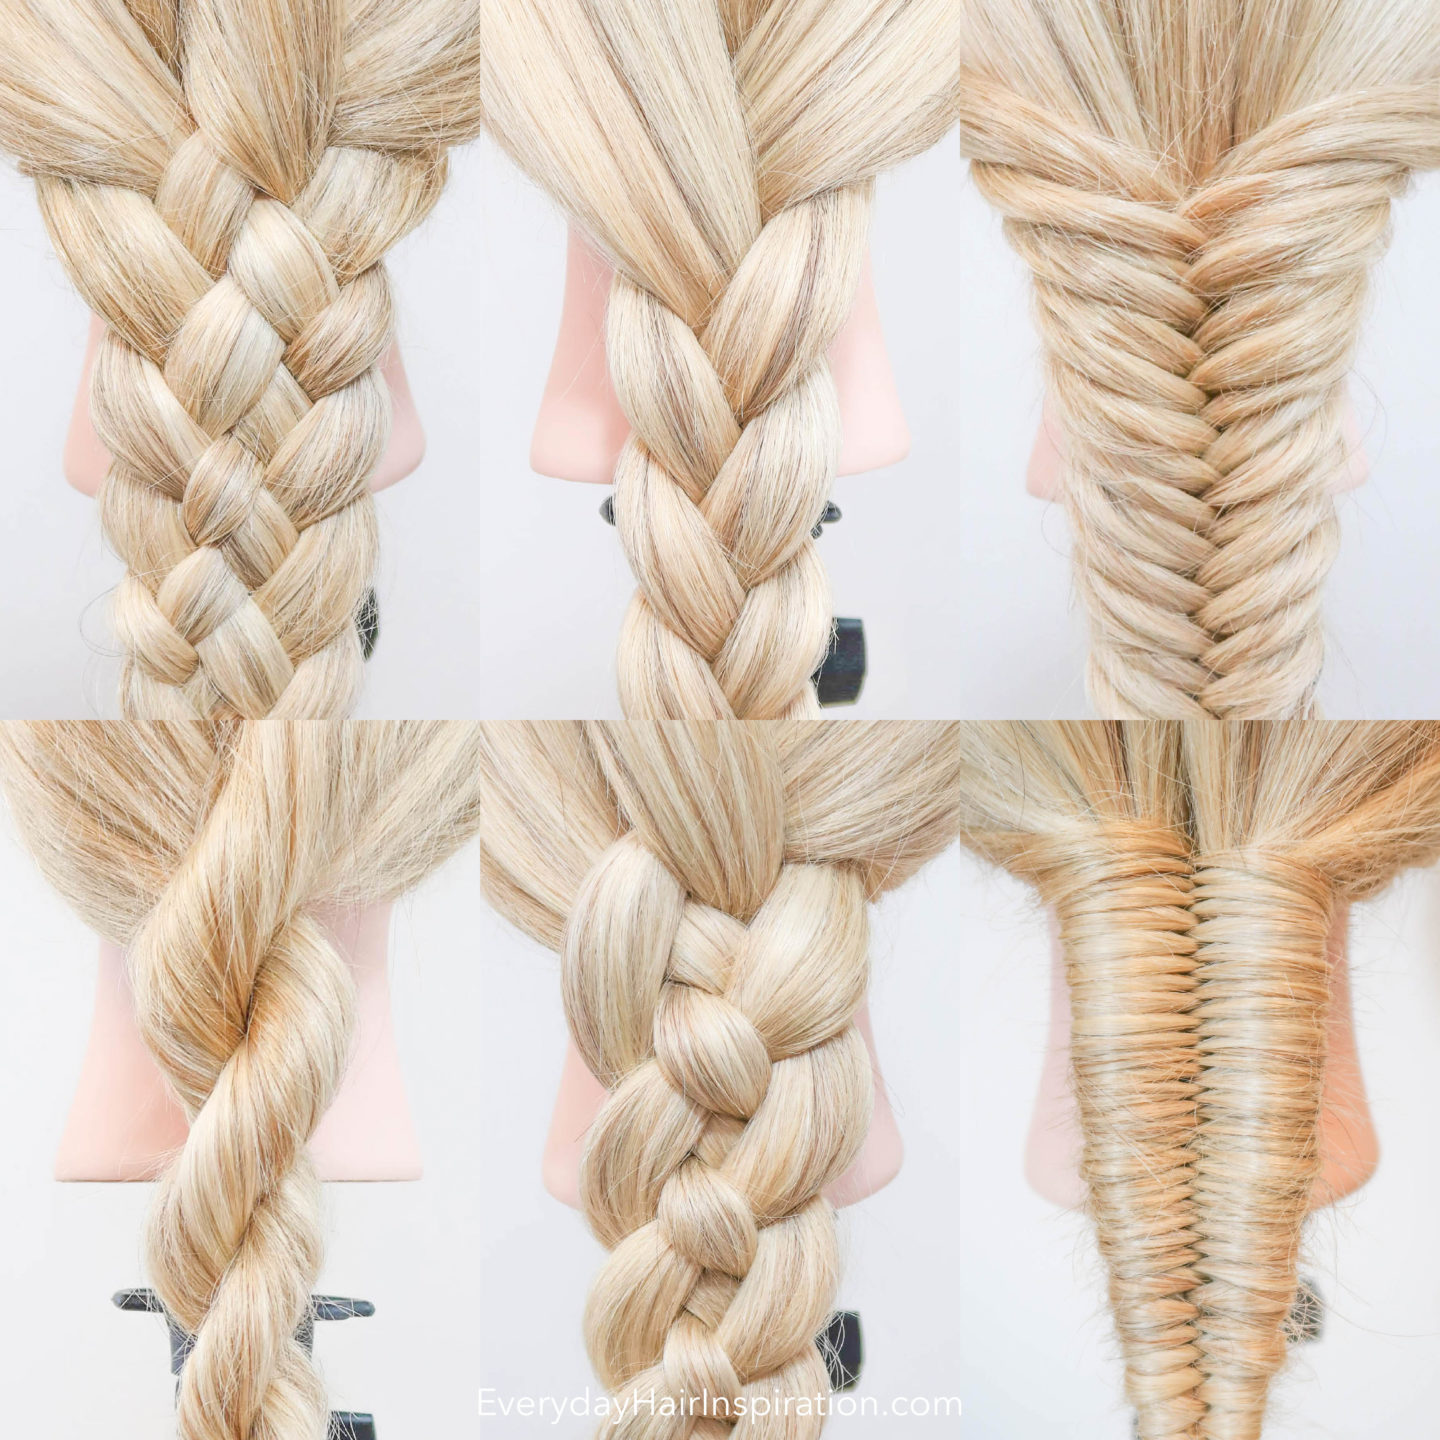 6 Easy Beginner Friendly Braids - Learn All In 1 Day! - Everyday Hair  inspiration